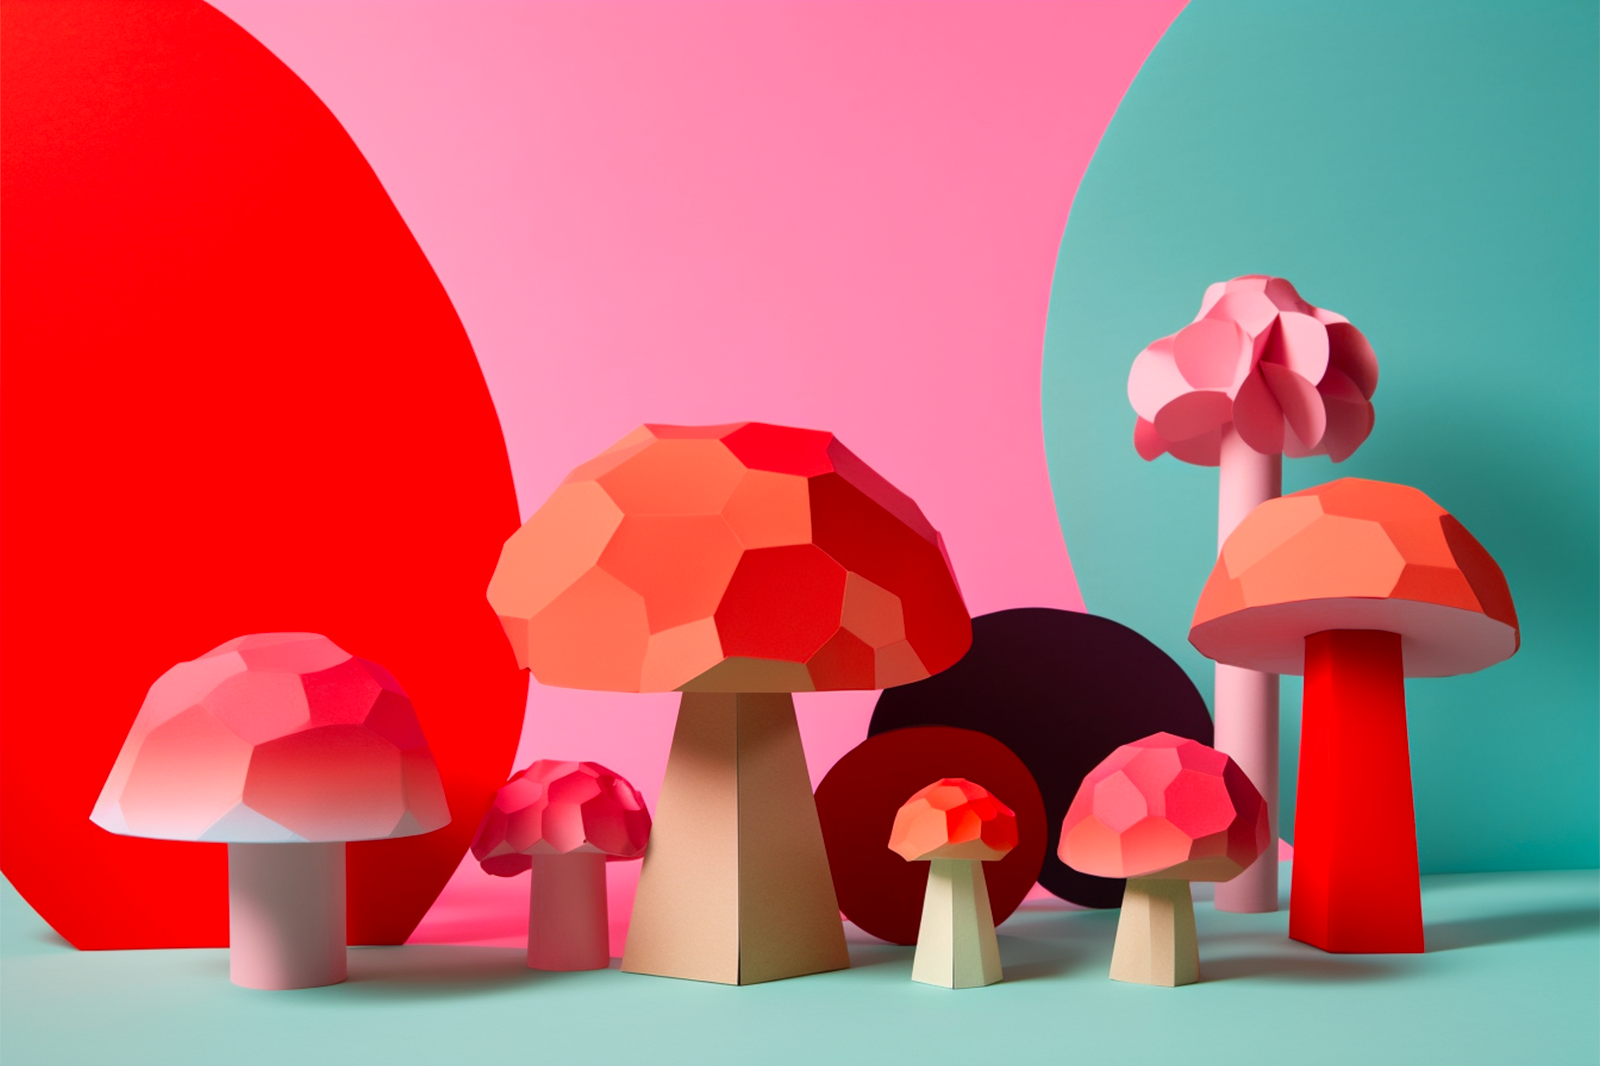 Some colorful papercraft mushrooms are placed on a white surface, with a multicolored background